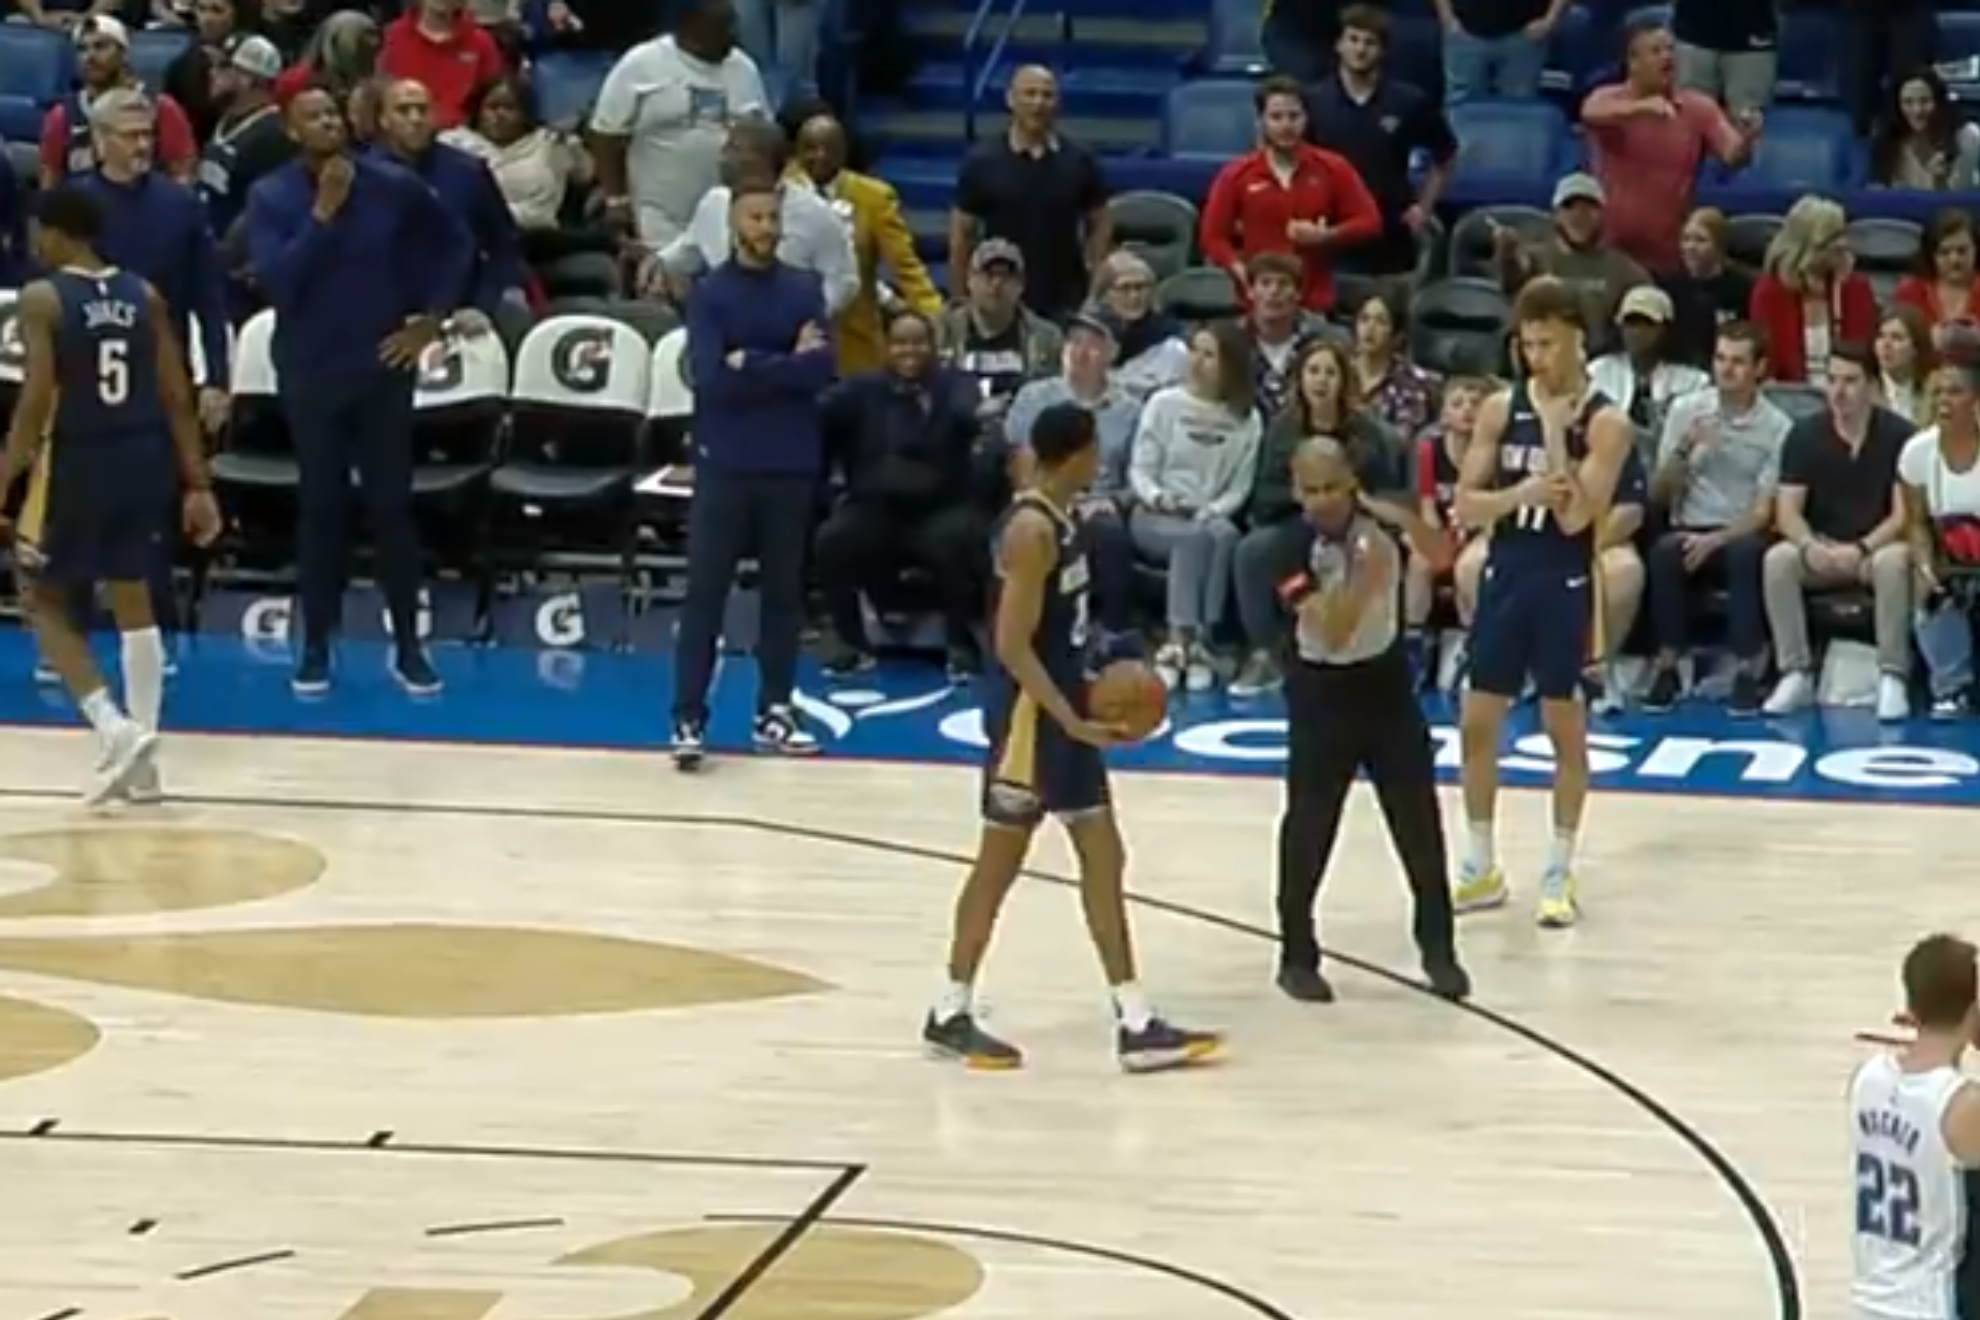 Referee Sean Corbins fit of rage: three ejected at once in Pelicans vs. Magic